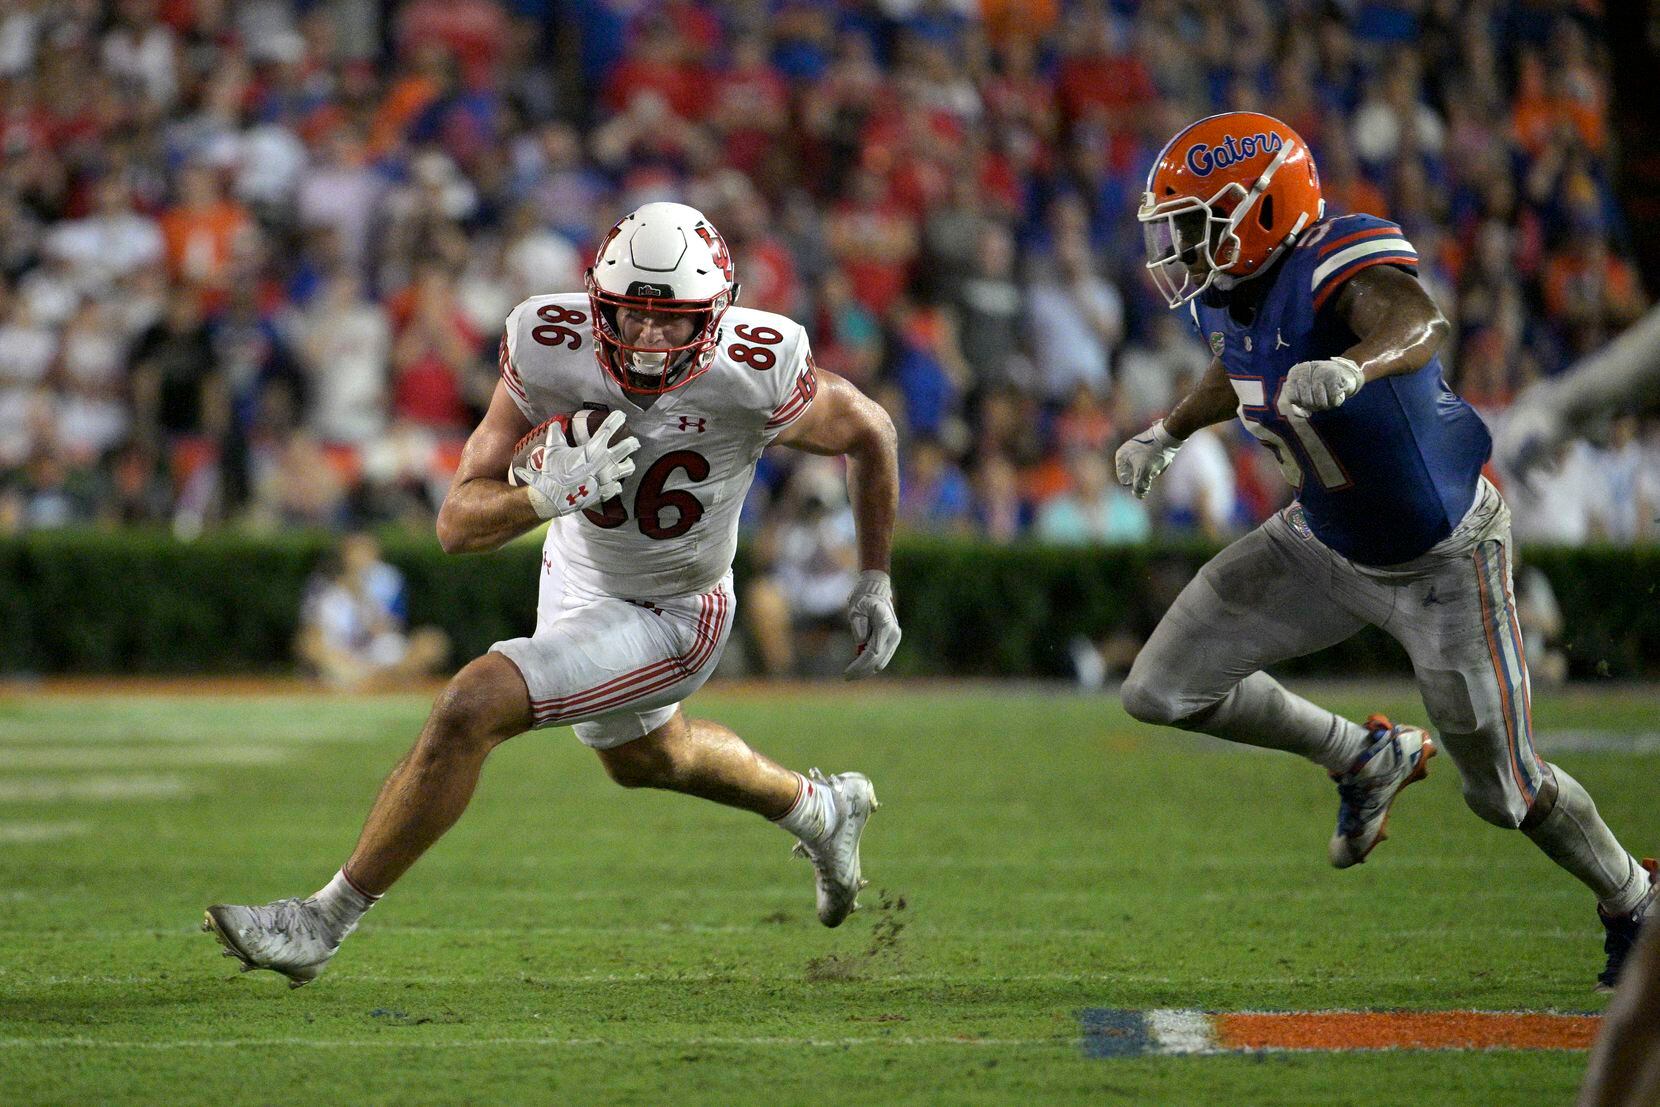 Utah tight end Dalton Kincaid (86) runs after catching a pass in front of Florida linebacker...